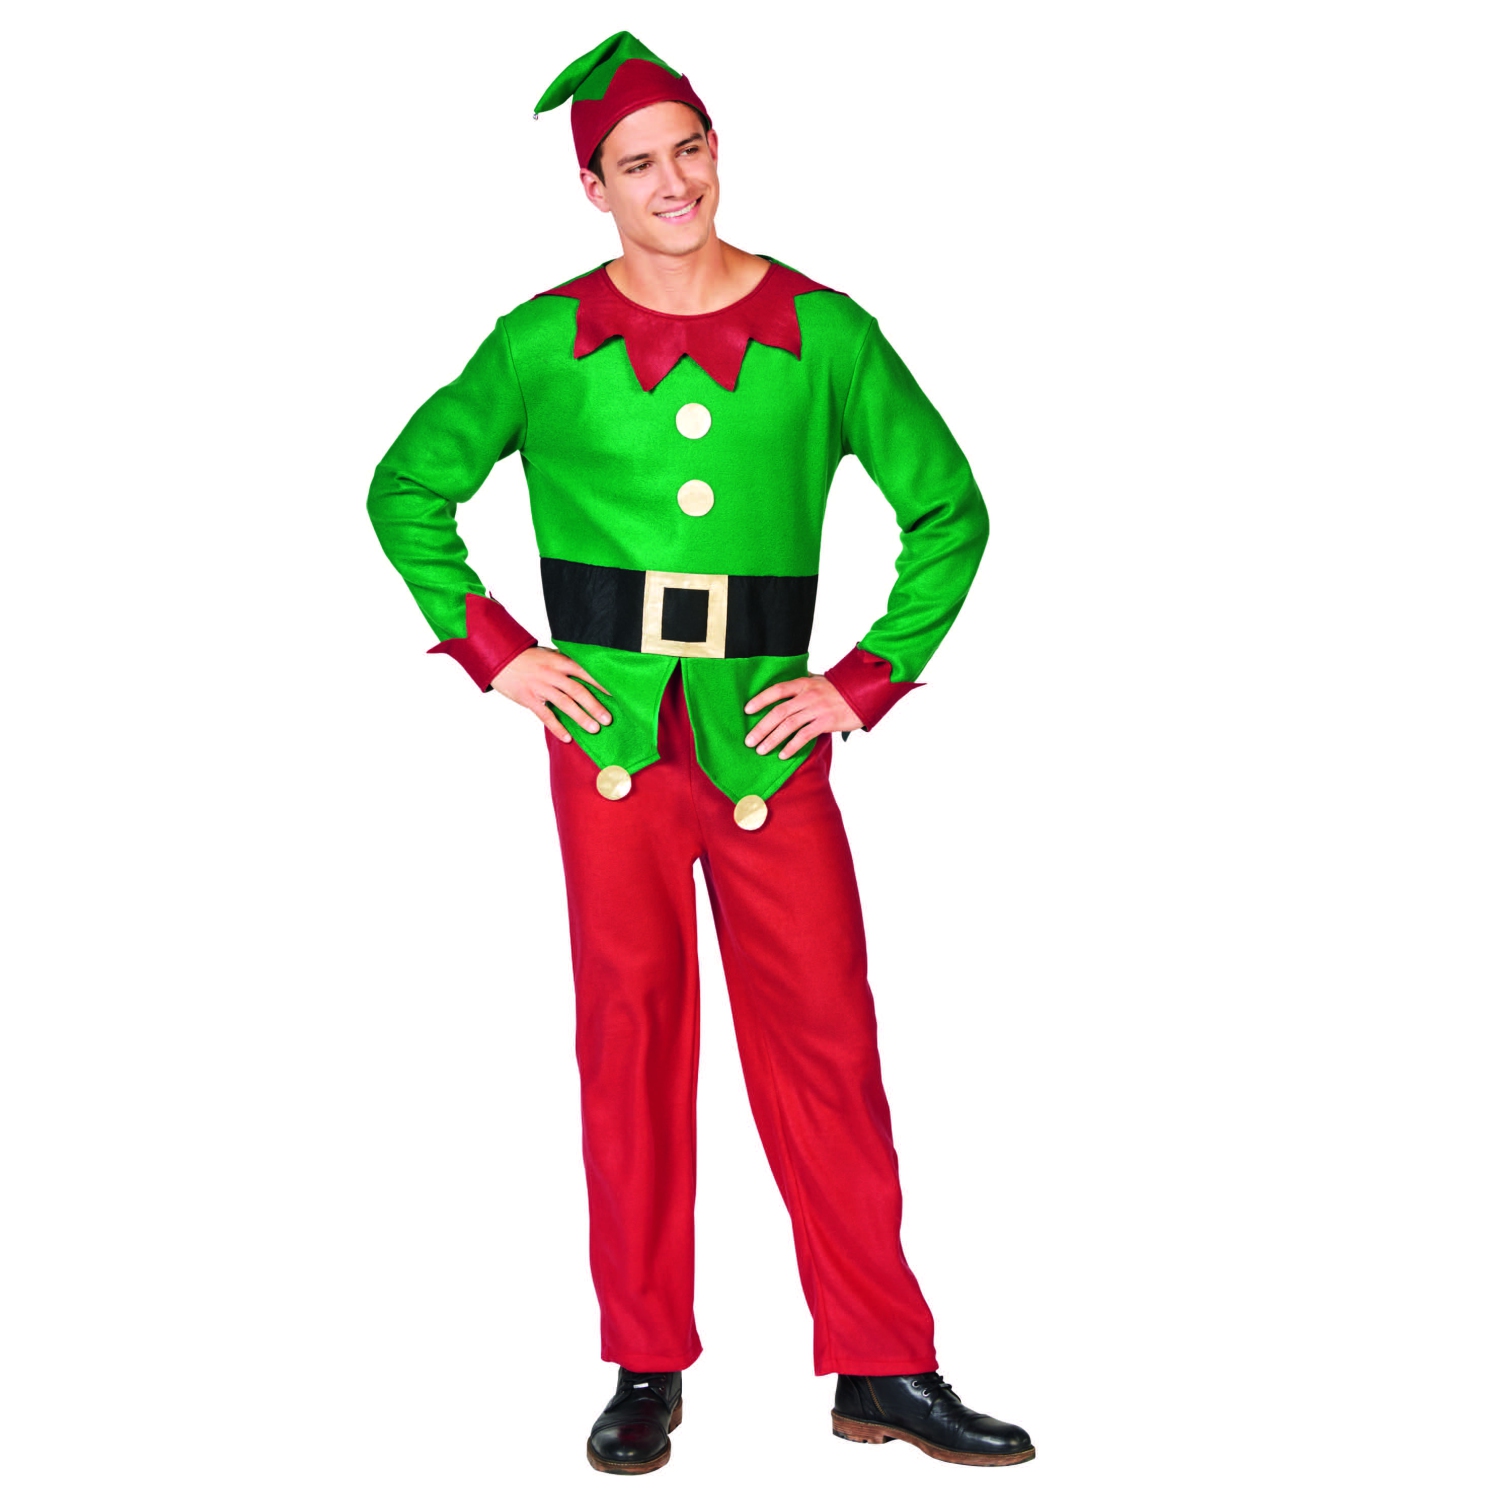 40" Red and Green Men's Elf Costume With a Christmas Santa Hat - Standard Size